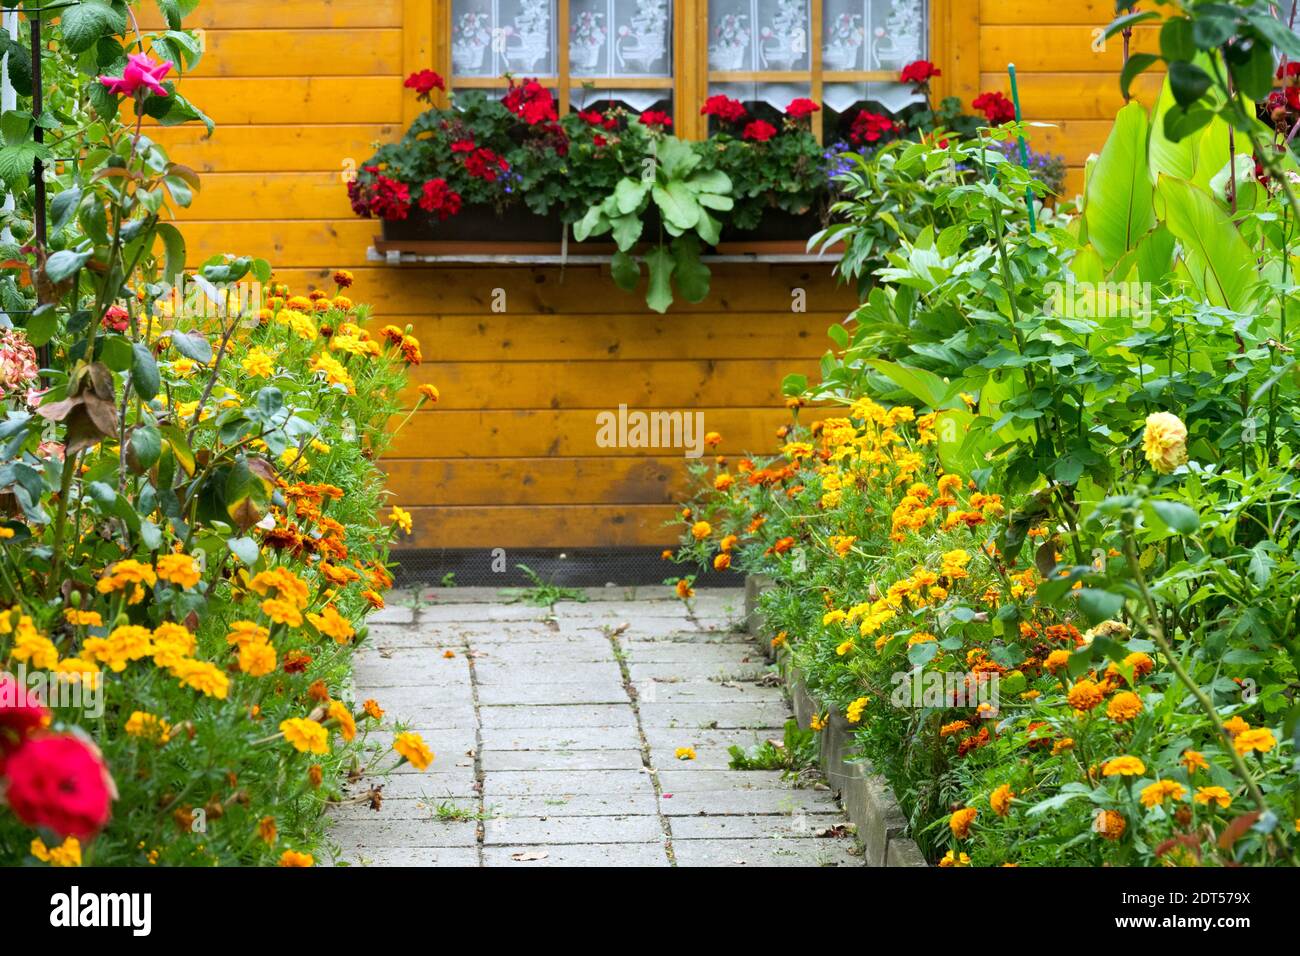 Garden shed cottage with shutters in the windows Germany suburb allotment garden Garden shed flowers Stock Photo